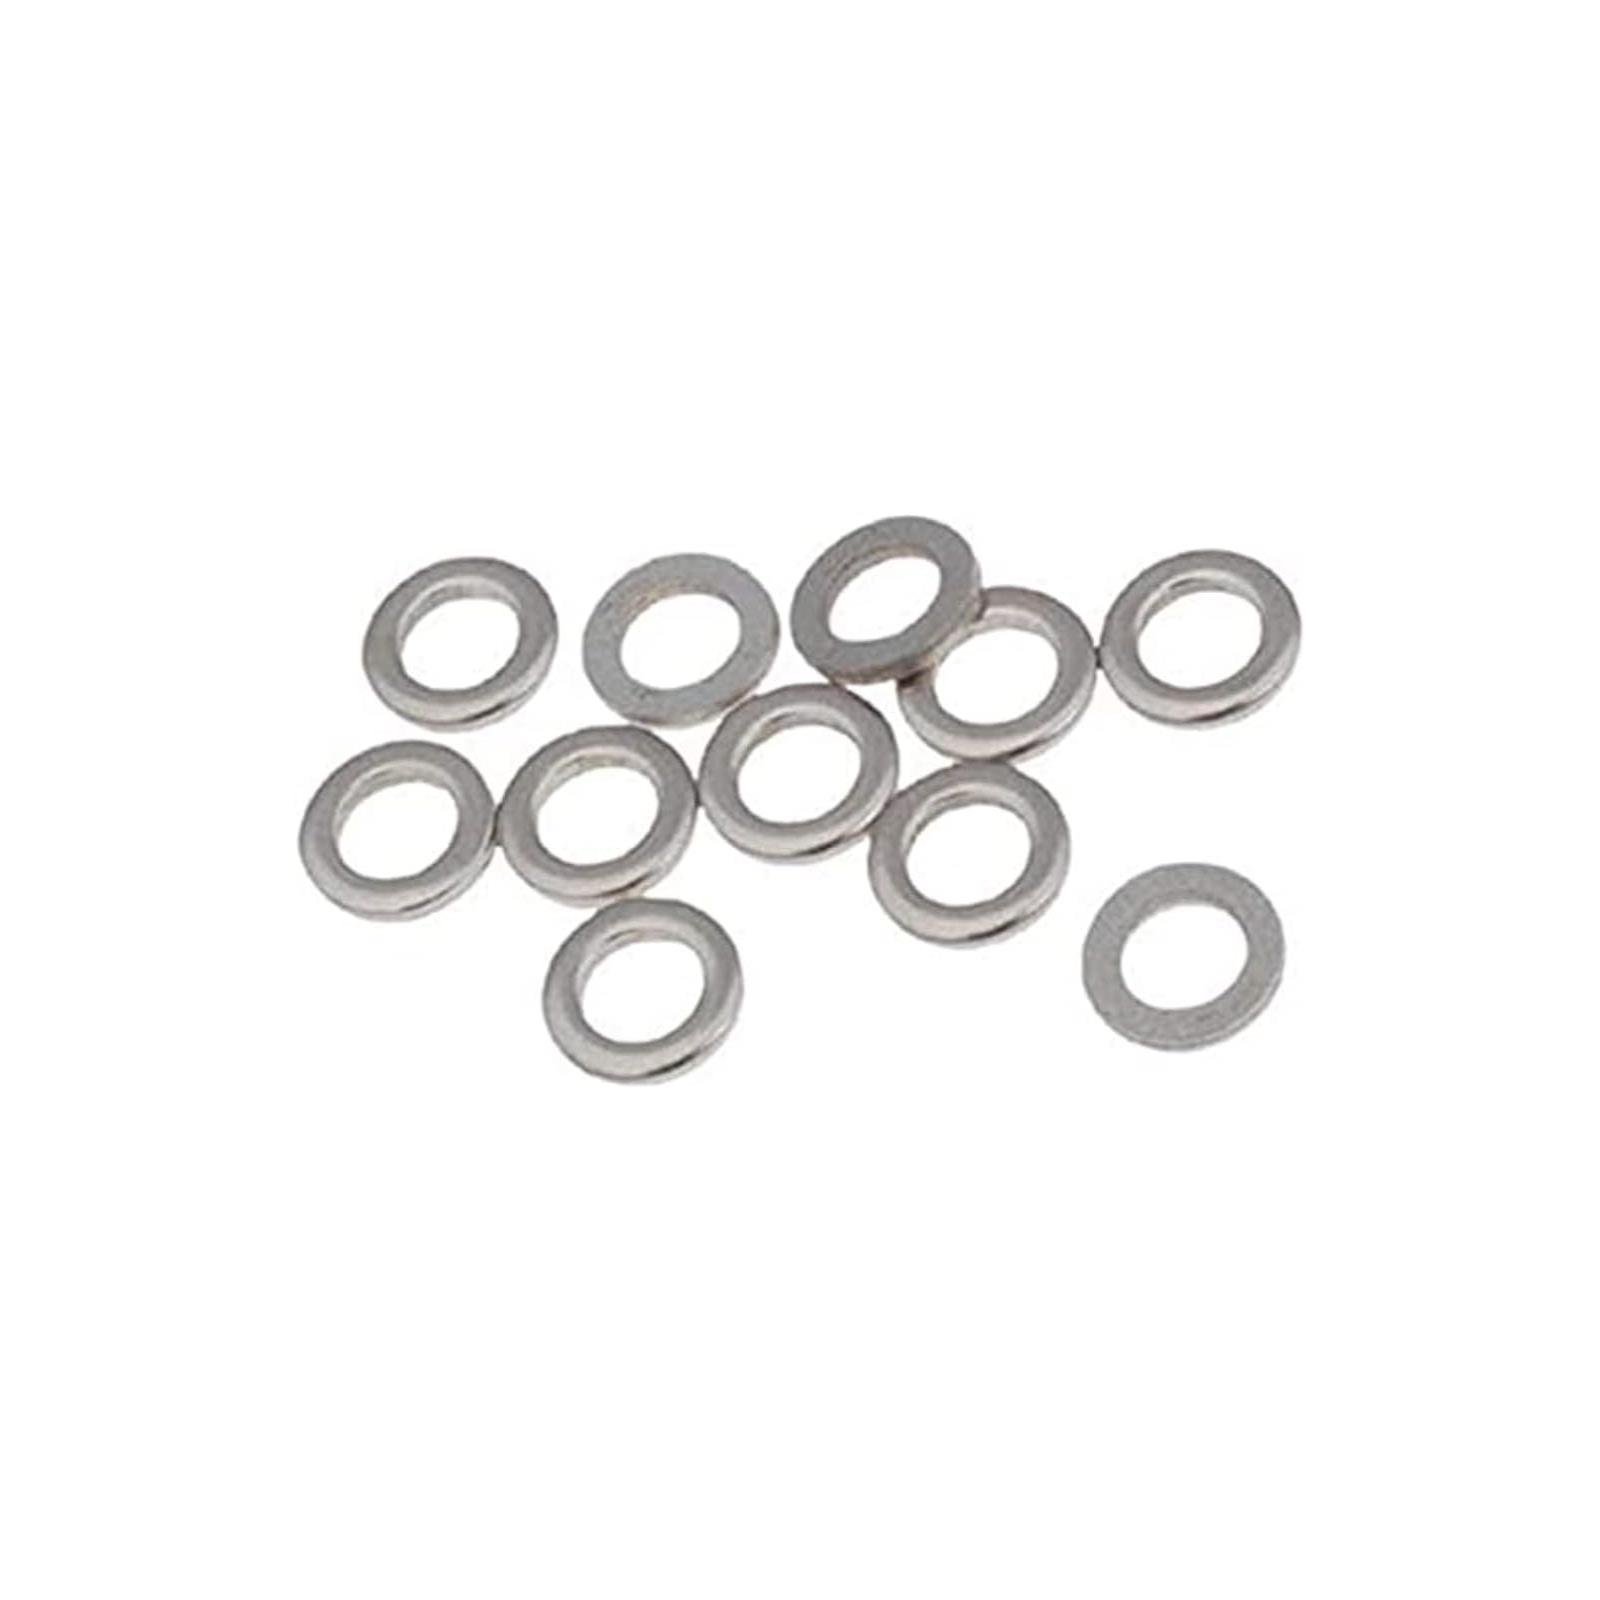 Gibralter Tension Rod Washers